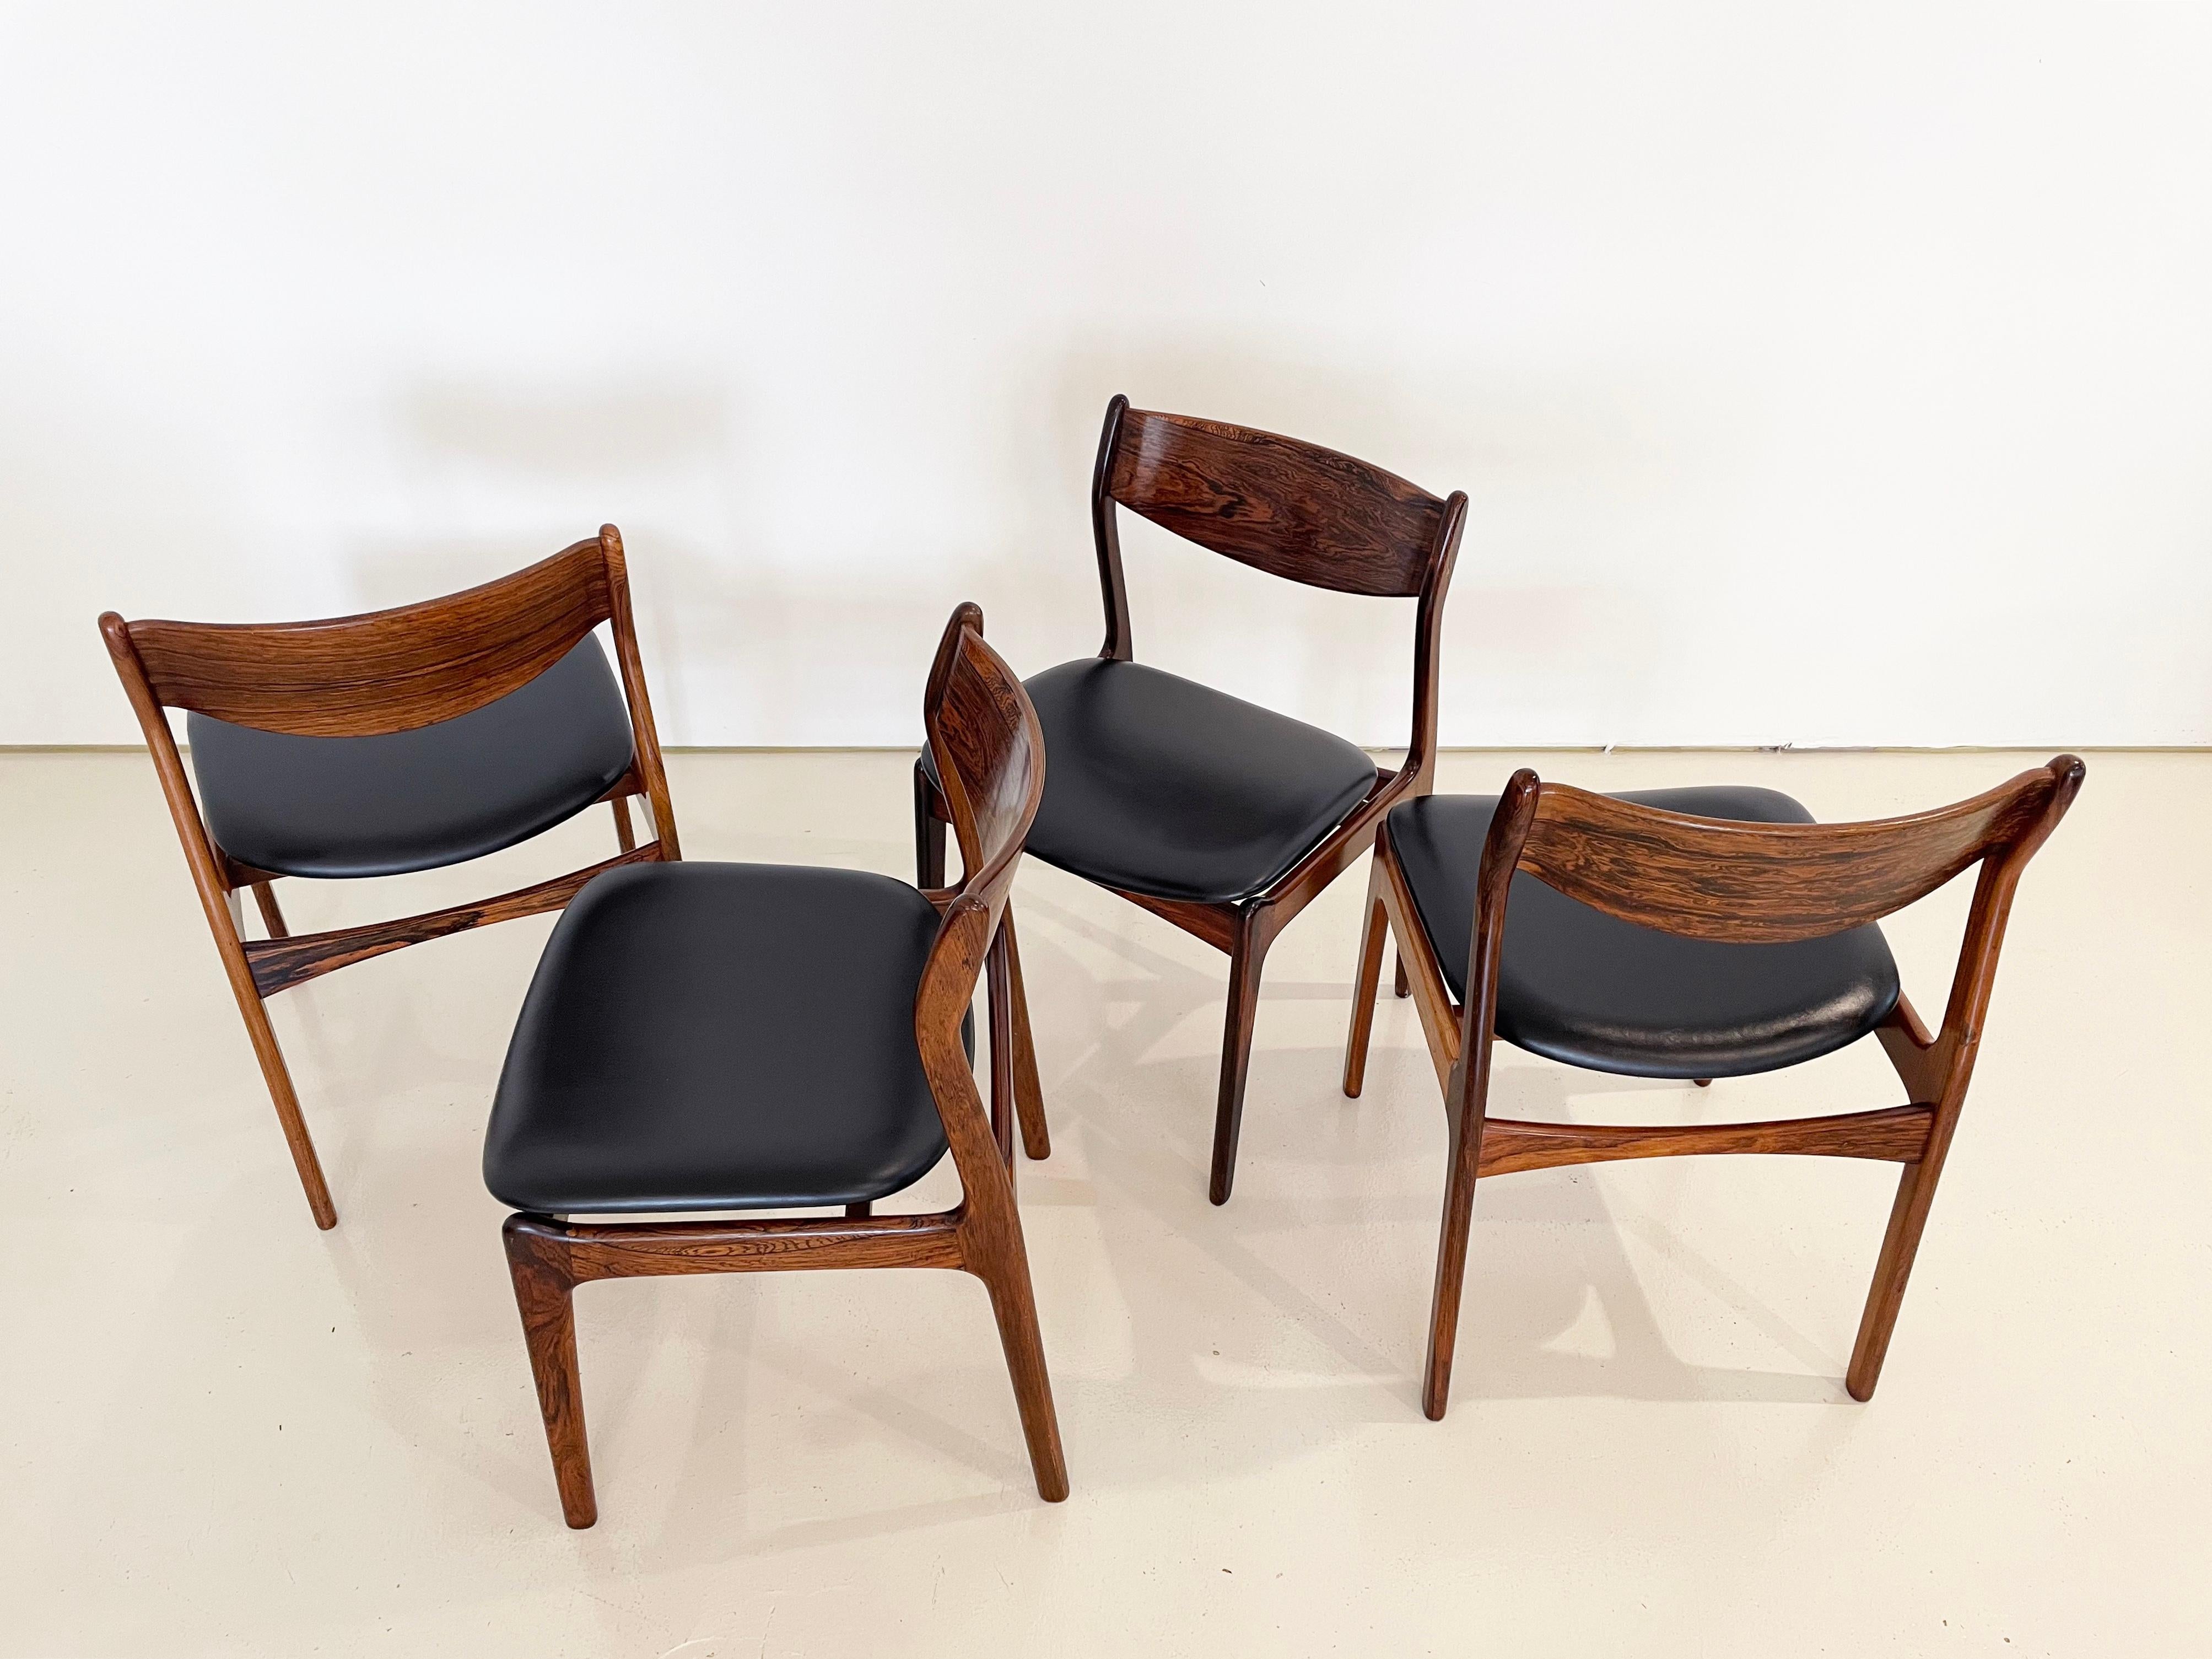 Vintage Mid-century Danish Dining Chairs, Designed by P.E. Jorgensen, Set of 8 For Sale 10